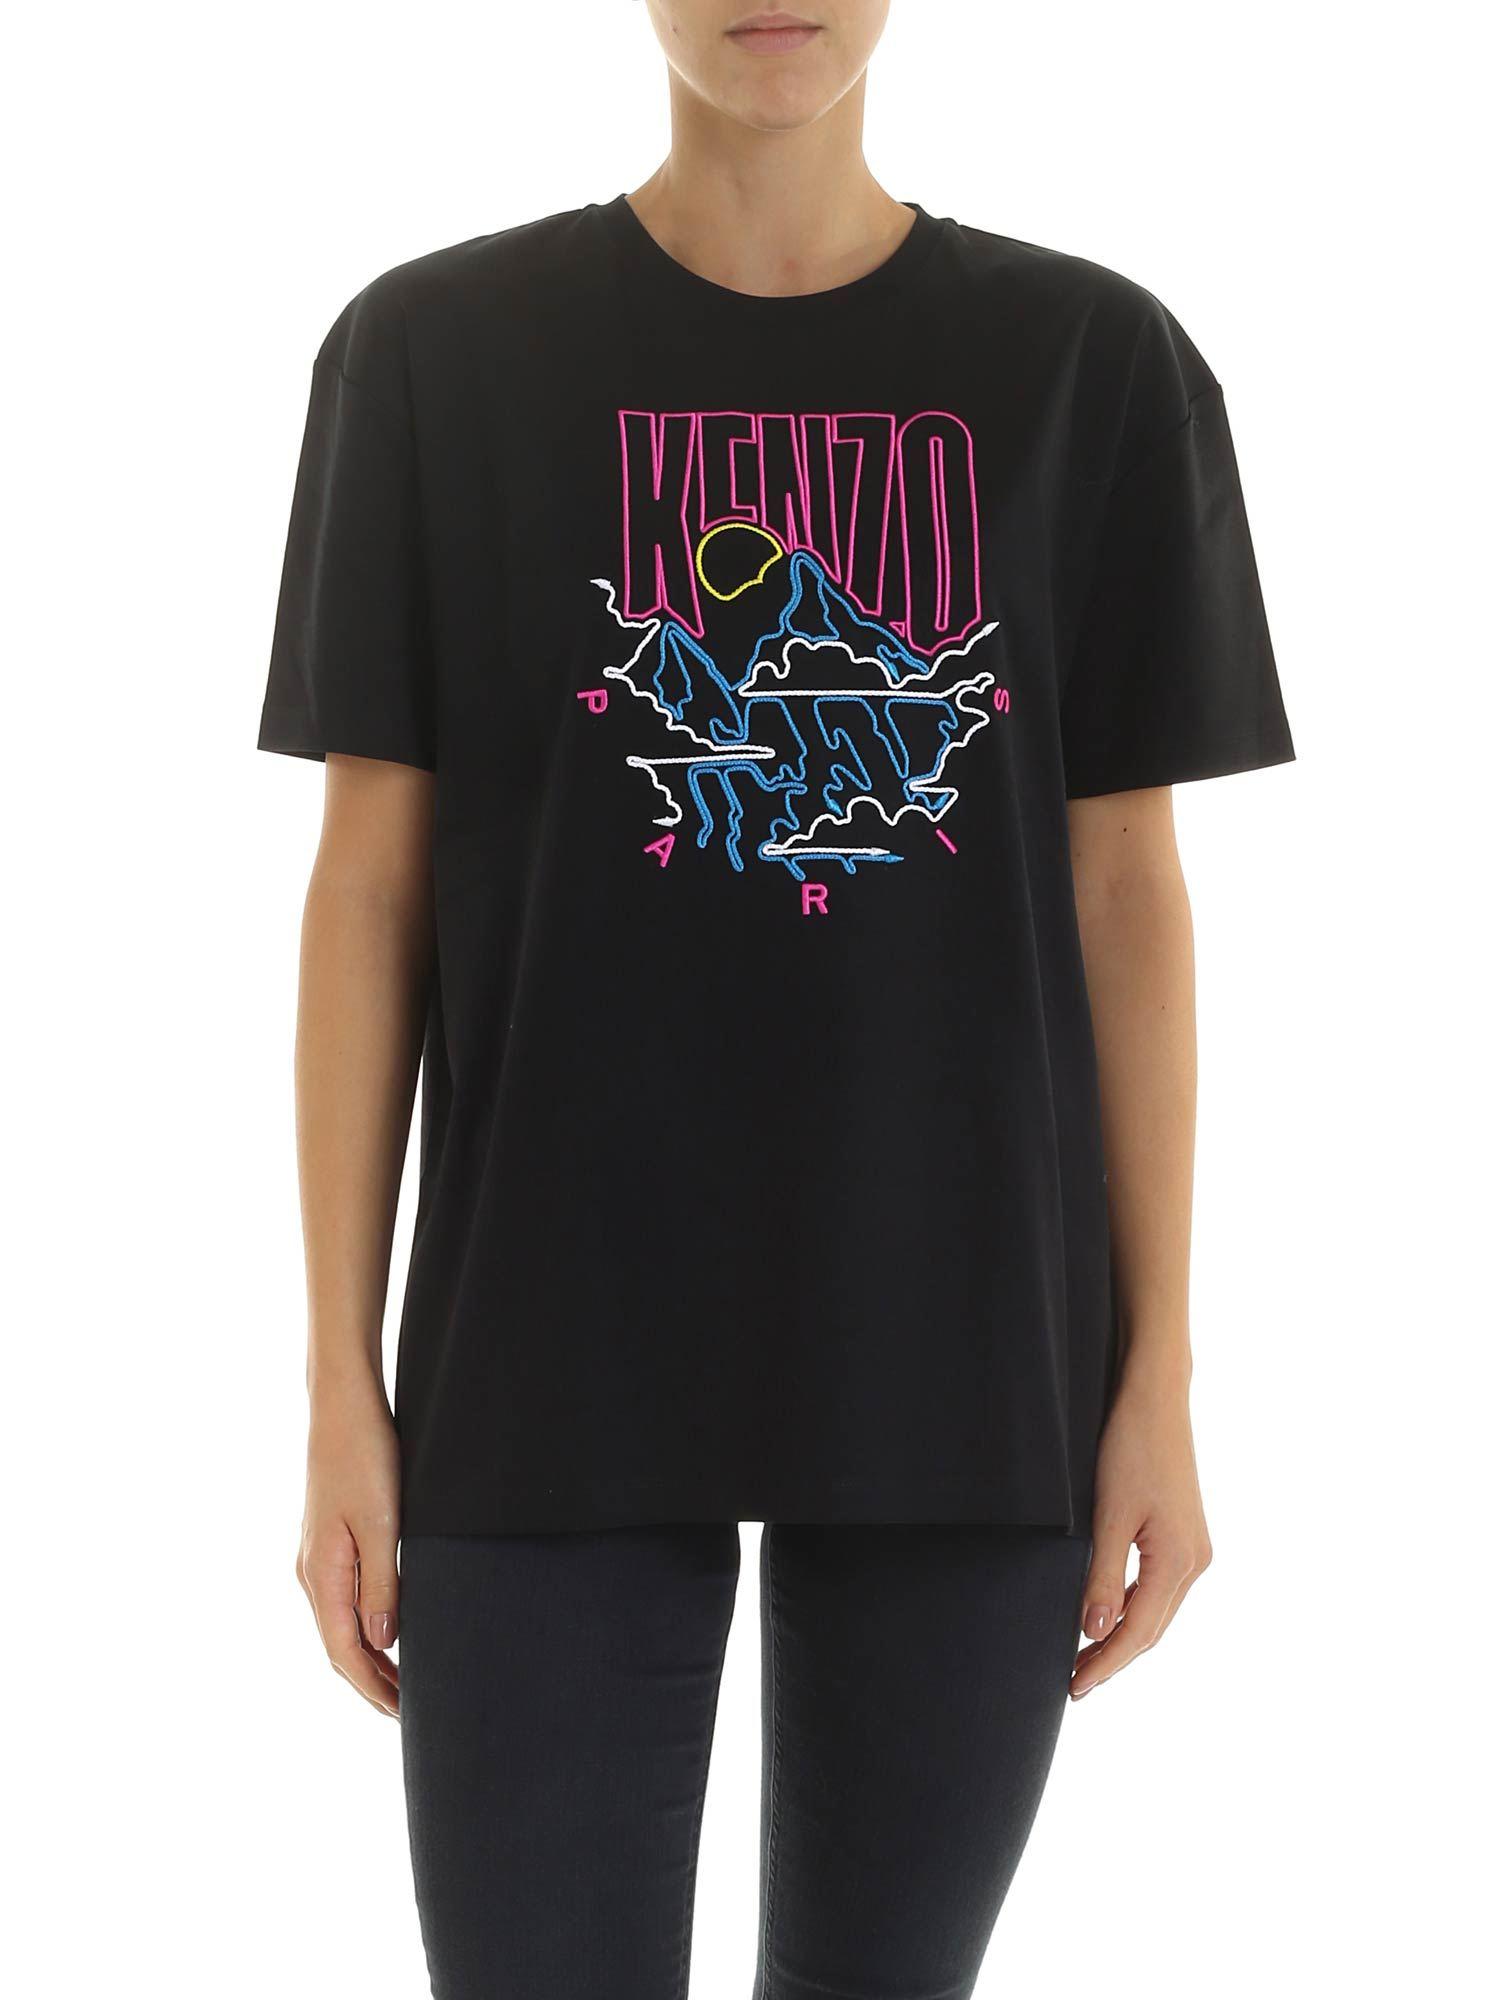 KENZO Cotton Embroidered Logo T-shirt in Black - Save 26% - Lyst